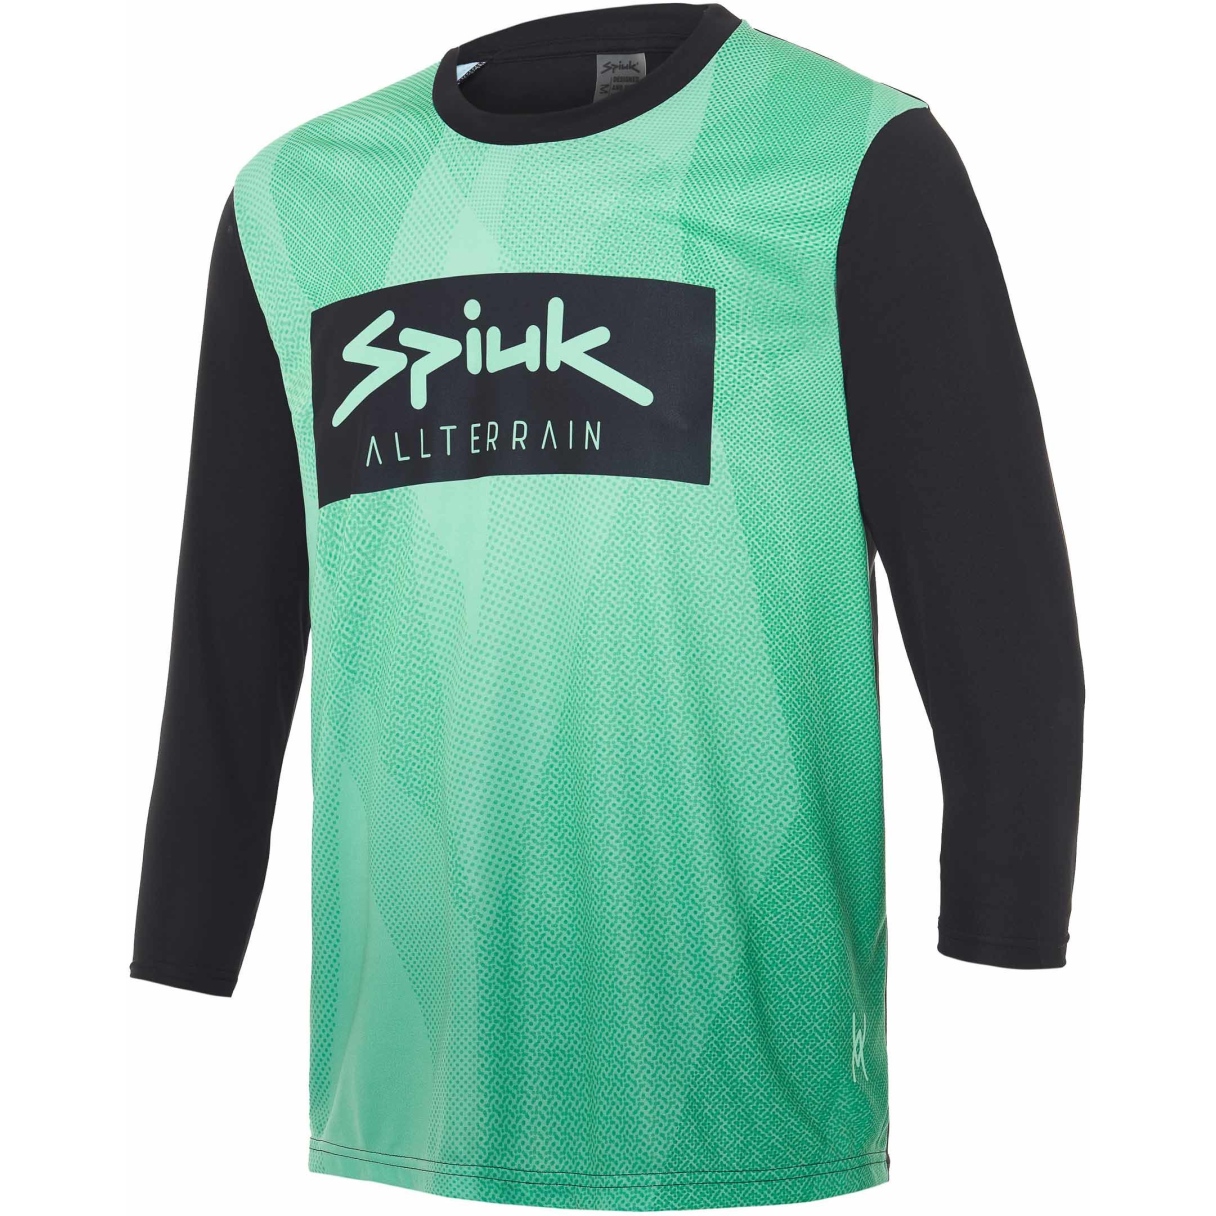 Image of Spiuk ALL TERRAIN 3/4 Sleeve Jersey Men - turquoise